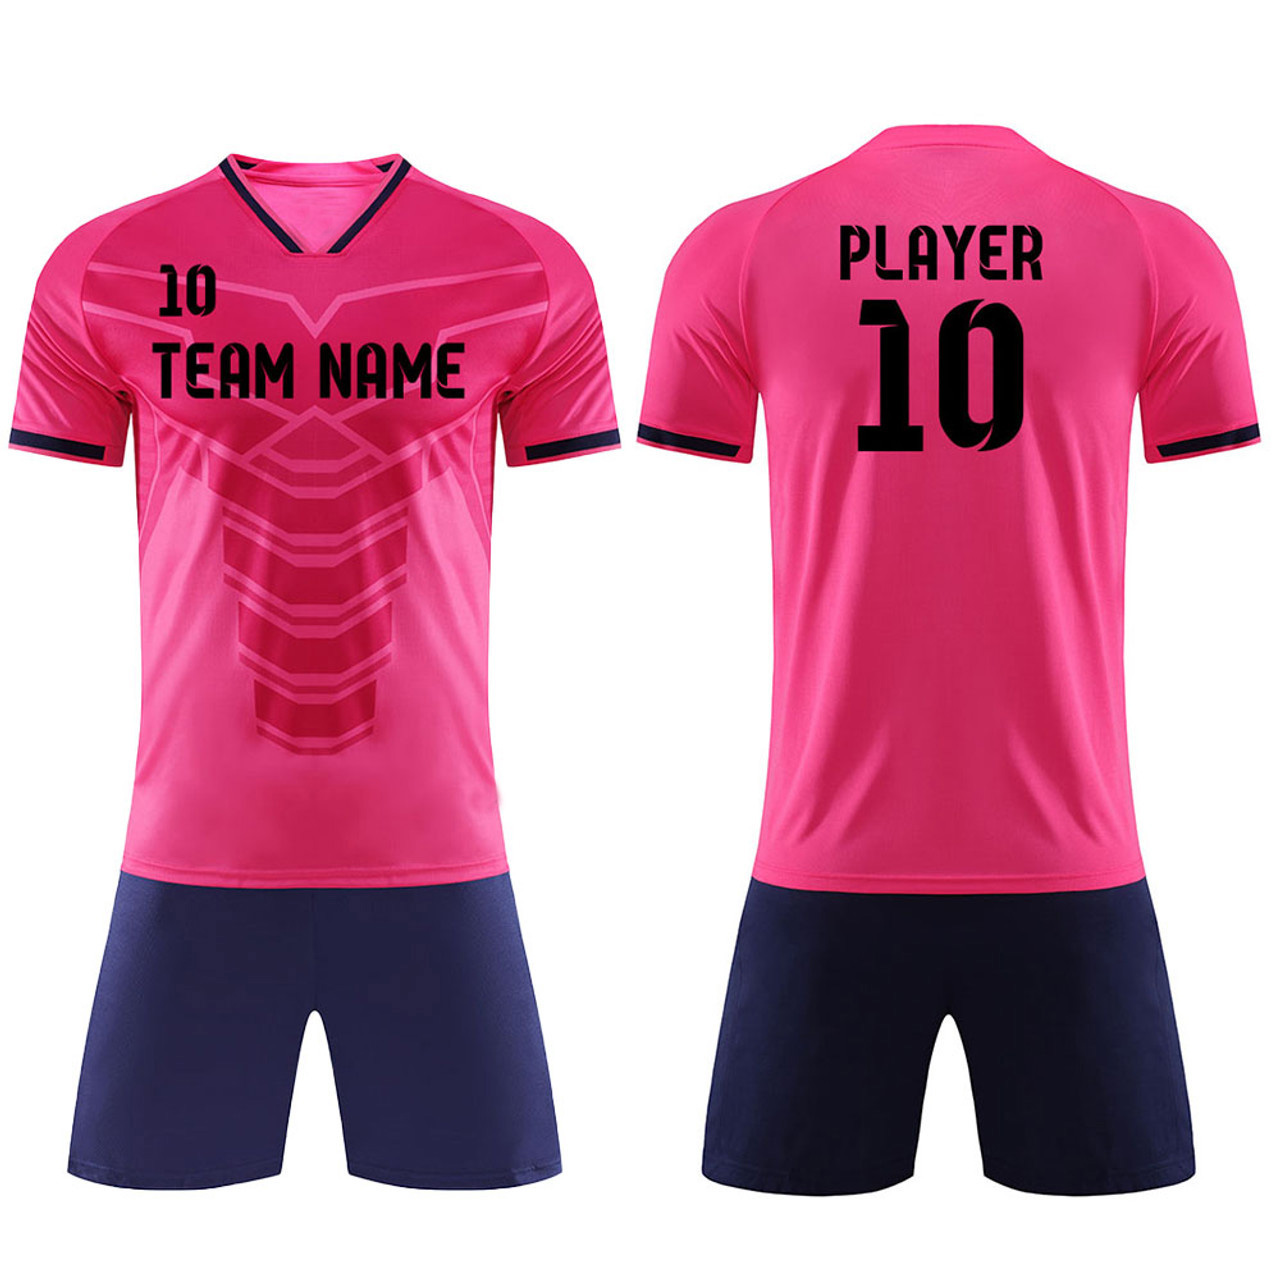 cricket jersey for men full sleeves with name team name number | soccer  jersey full sleeve | soccer jersey customize for men boys | football jersey